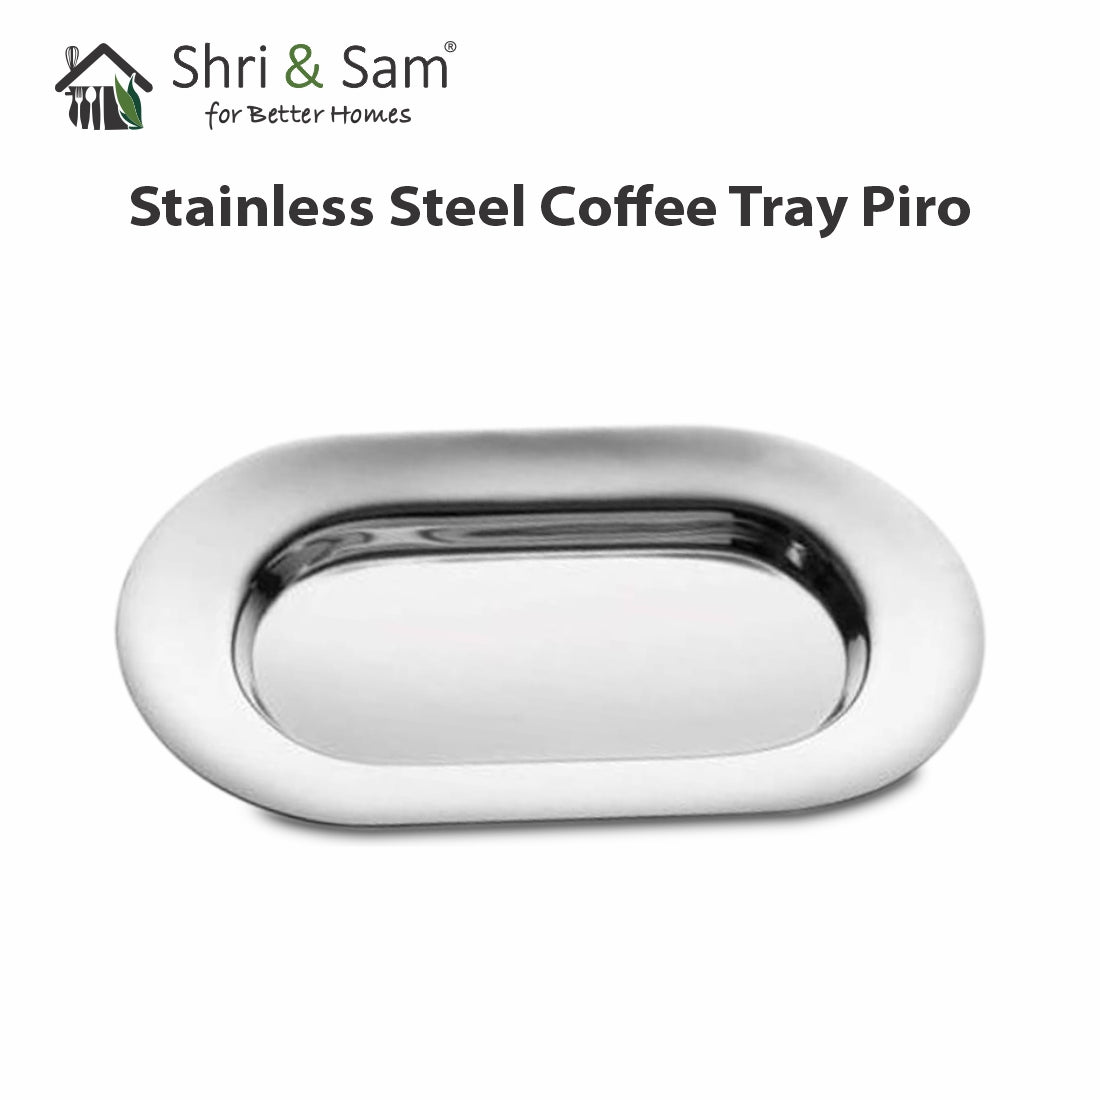 Stainless Steel Coffee Tray Piro